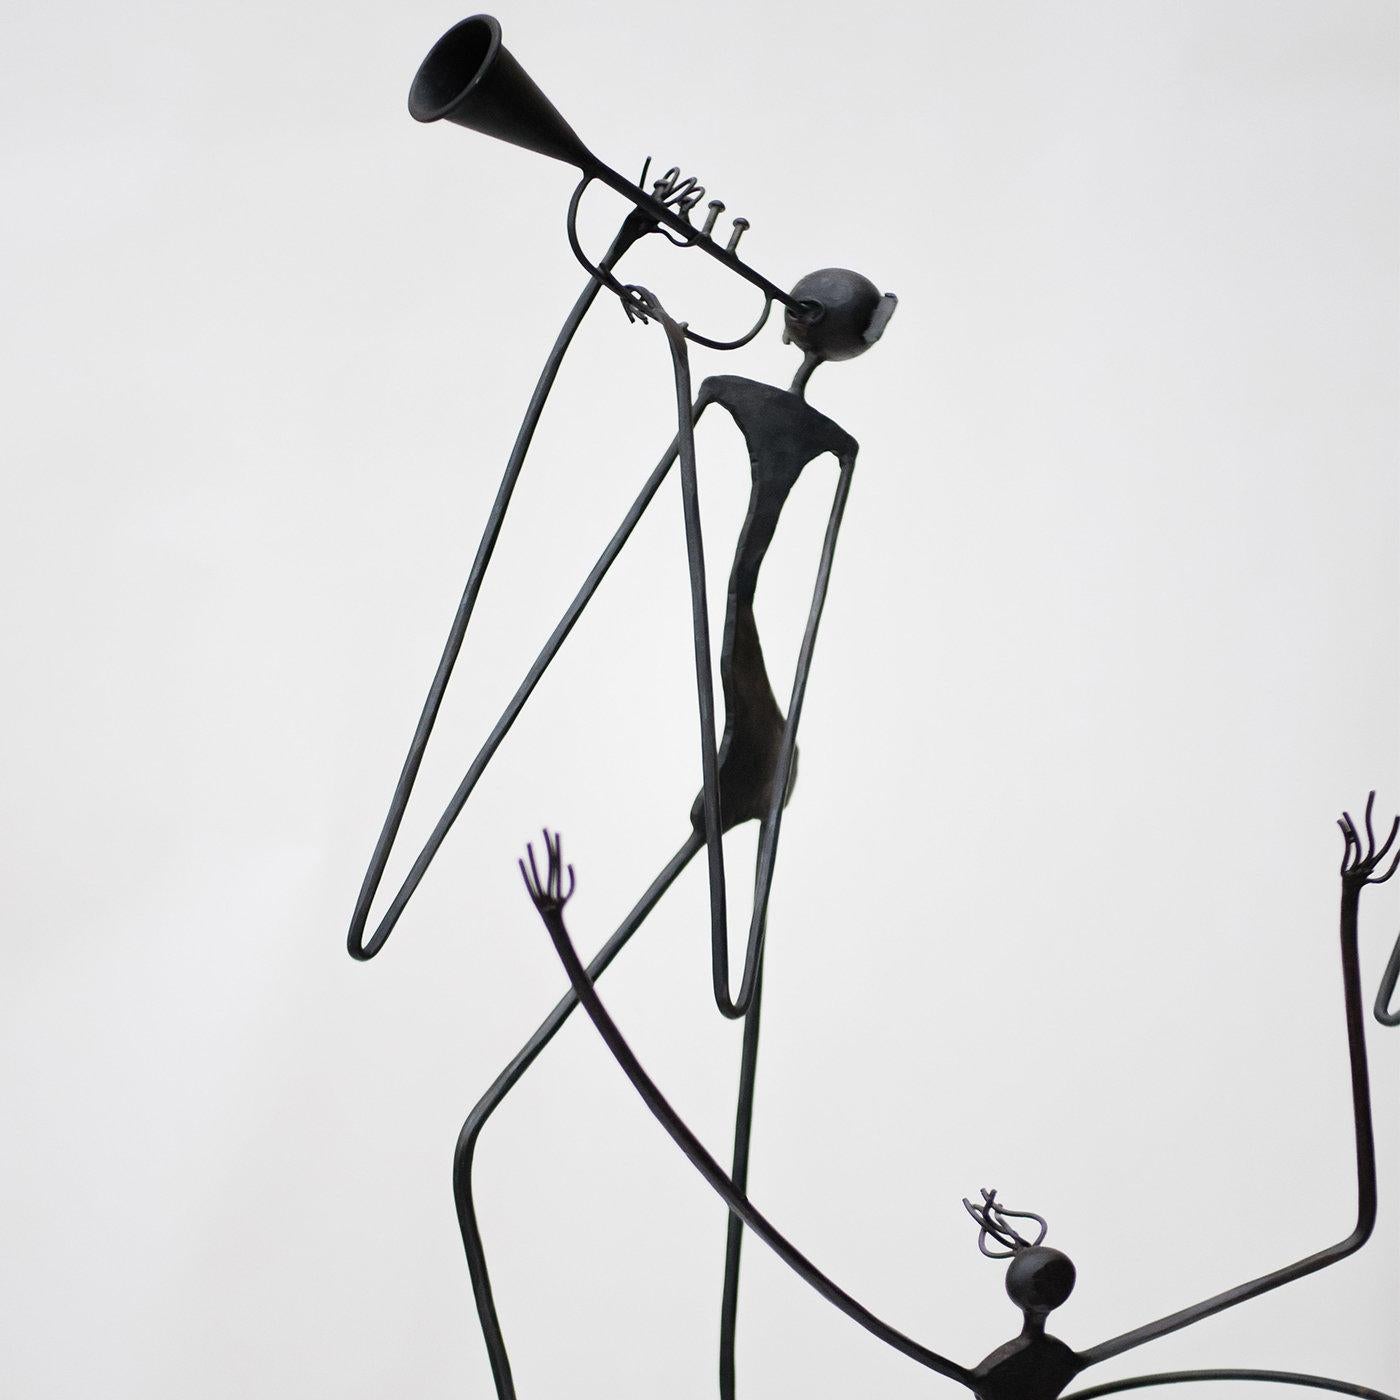 This flattering, anthropomorphic sculpture in wrought iron is a spiritual and concrete homage to jazz, expressing through dramatic and unproportioned volumes the genre's characteristic elegance and grandeur. It depicts, in a stylized, visionary